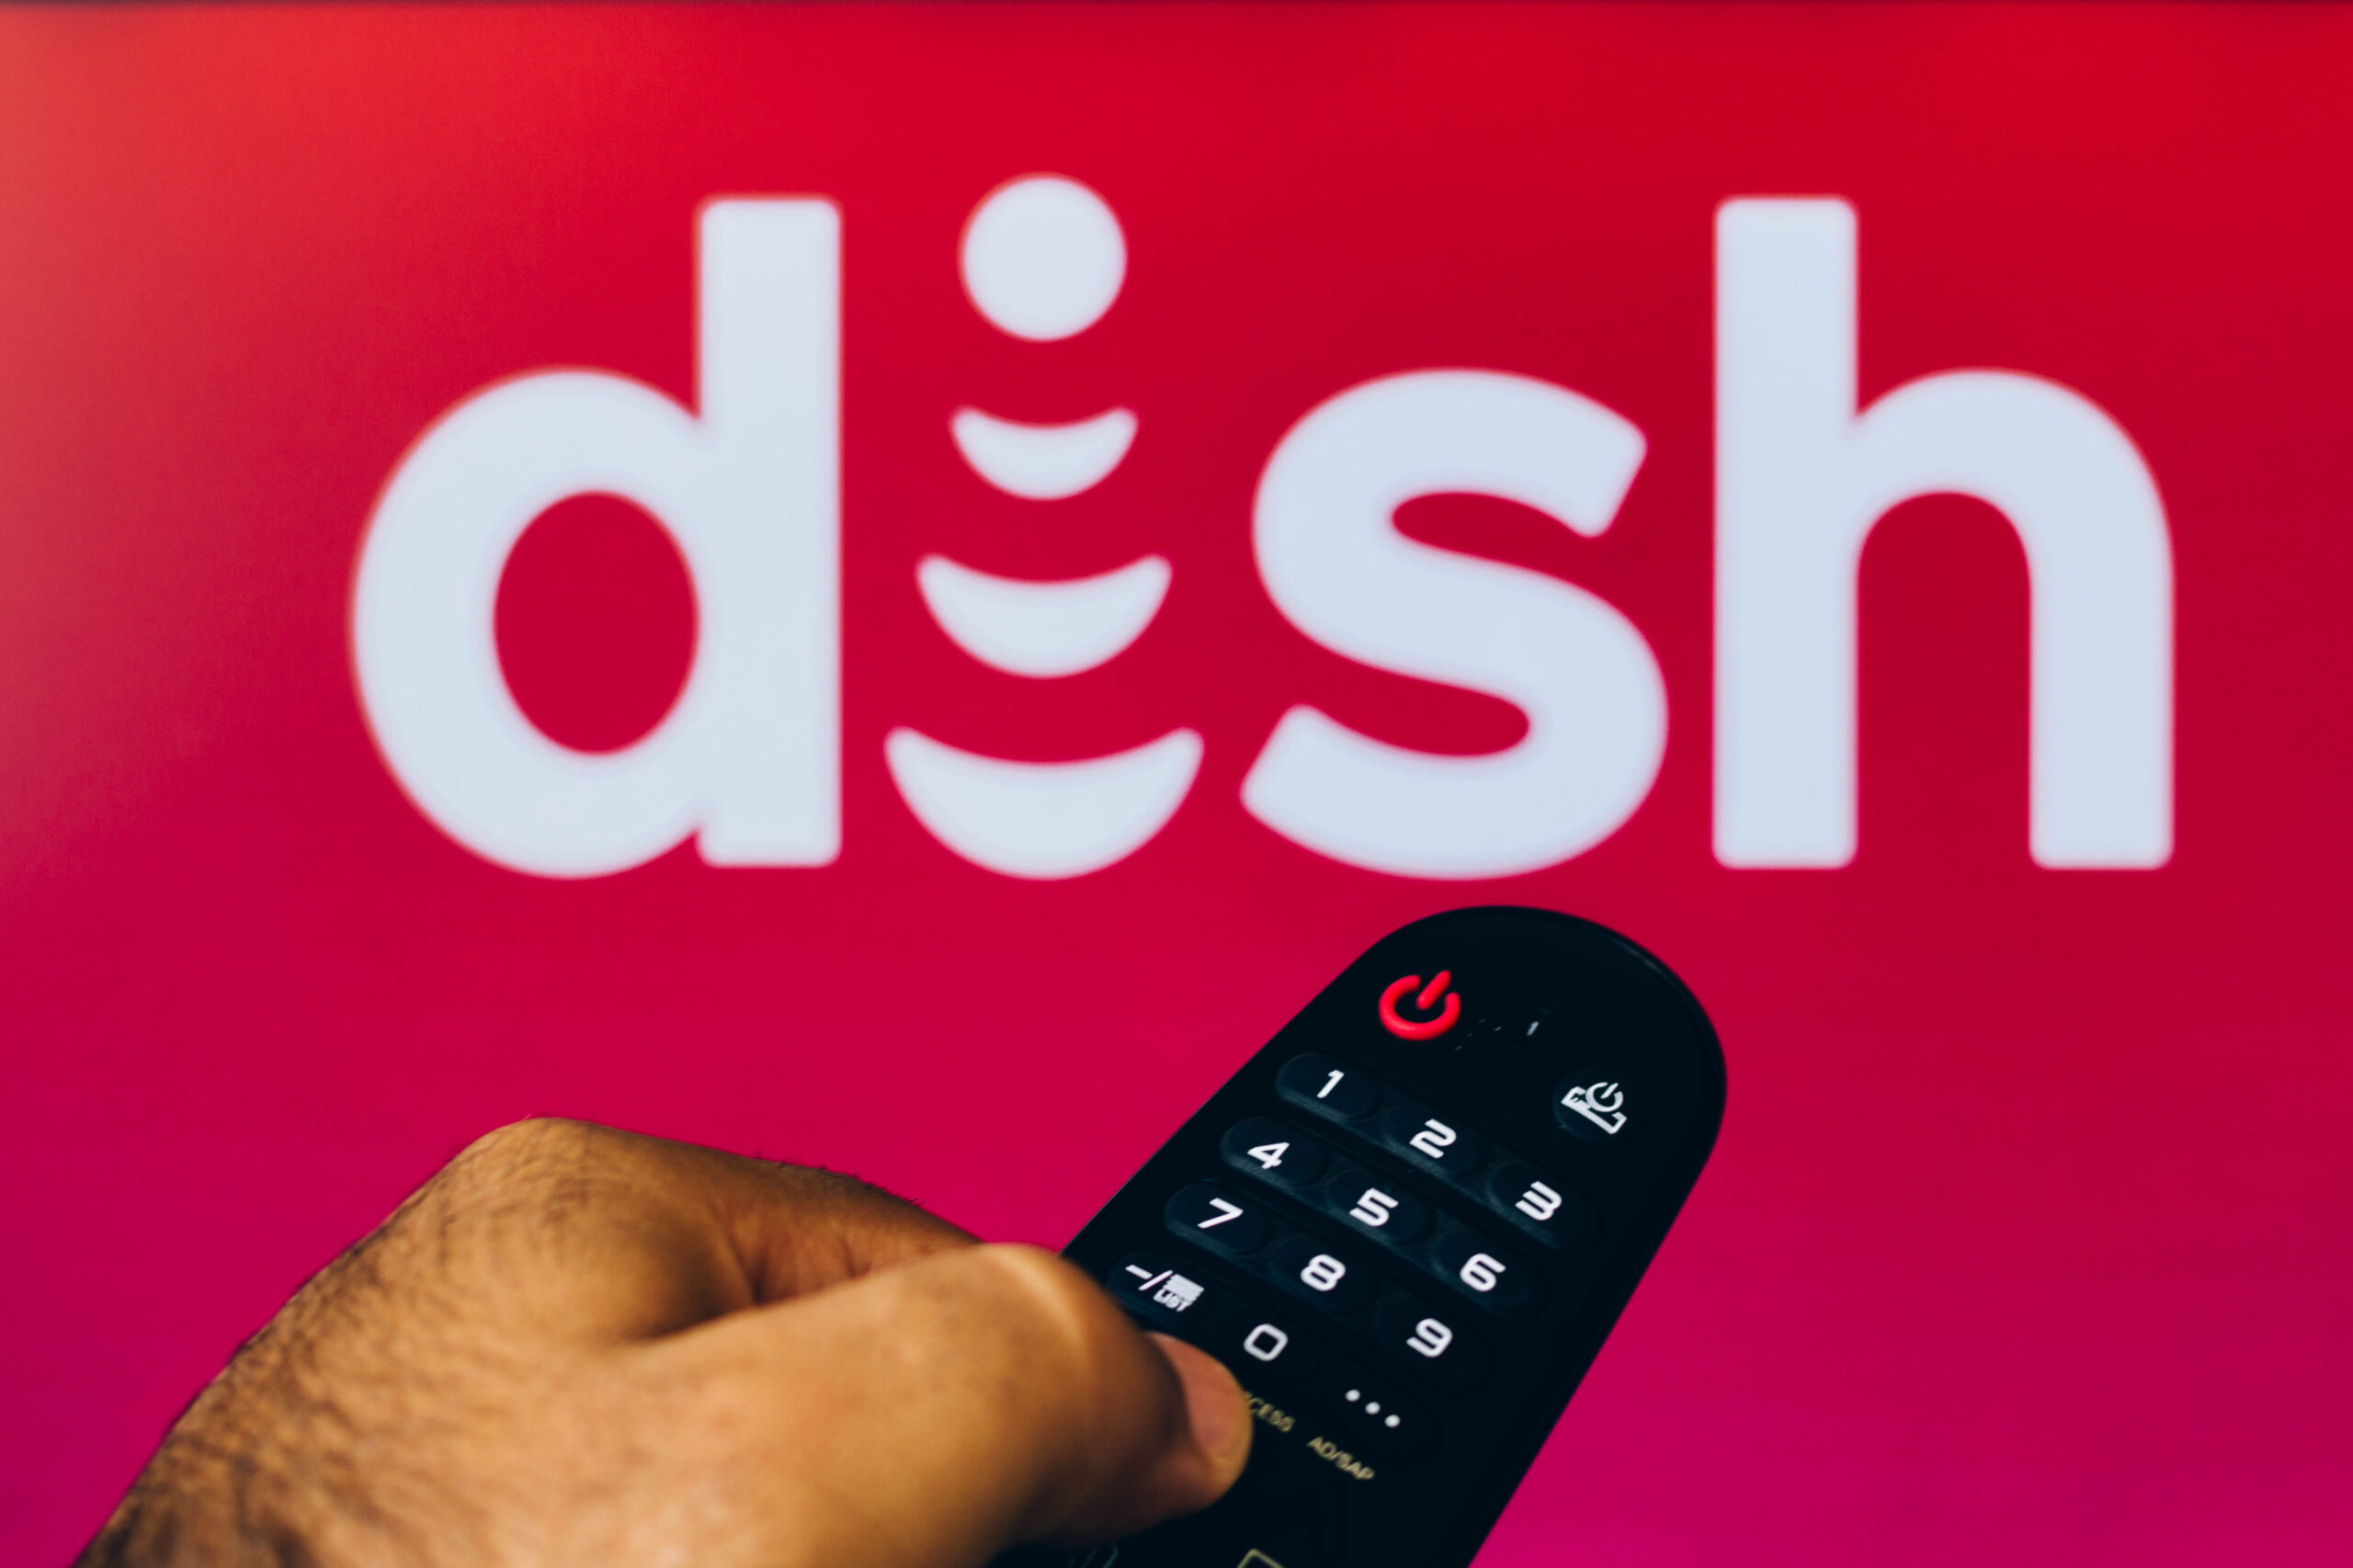 February 21, 2022, Brazil. In this photo illustration a close-up of a hand holding a TV remote control seen displayed in front of the Dish Network Corporation logo